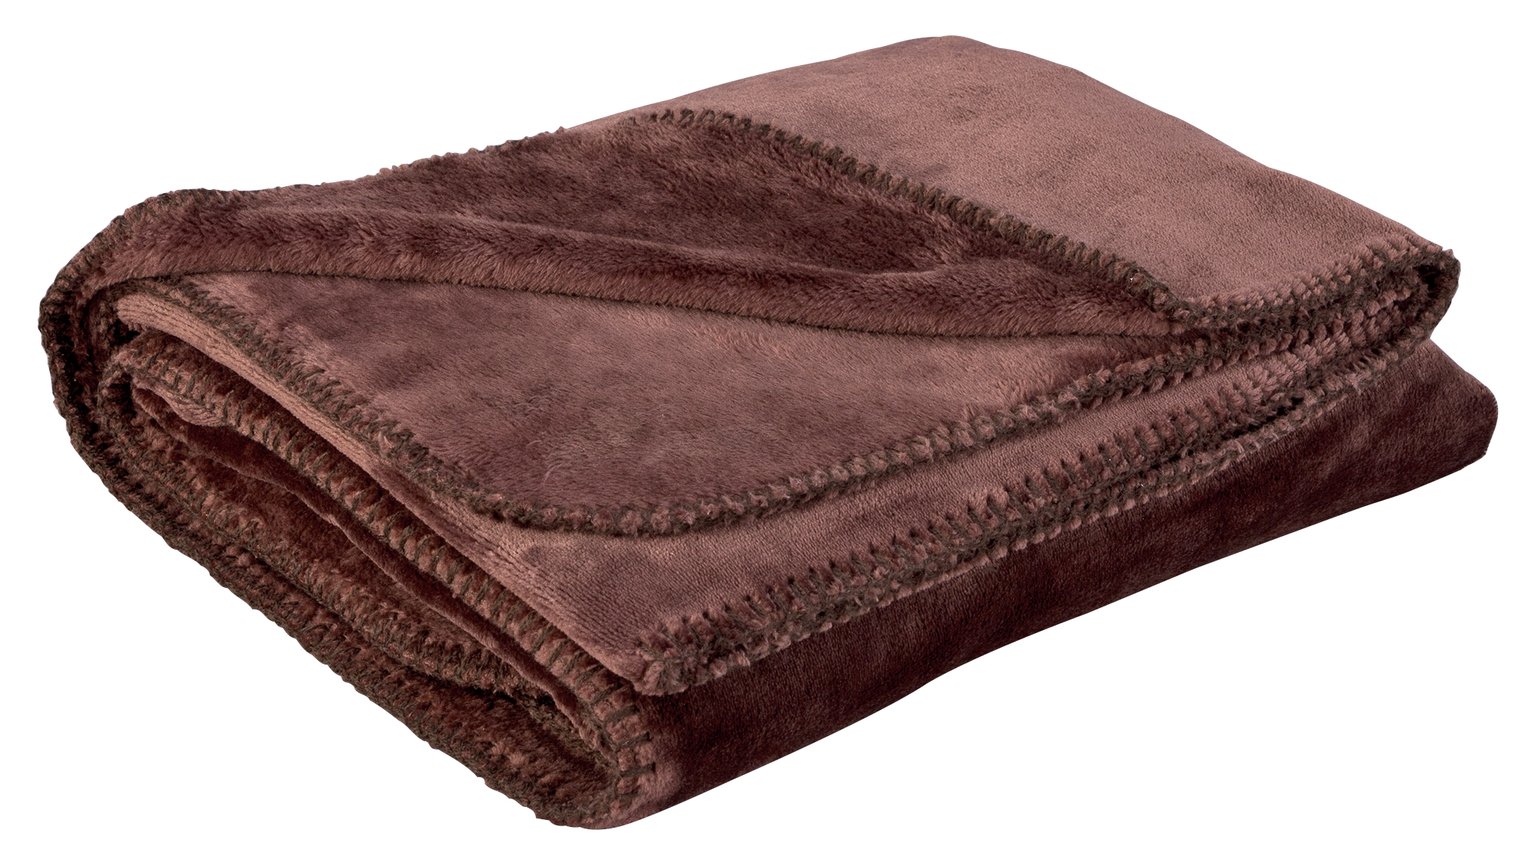 Argos Home Supersoft Large Throw - Chocolate